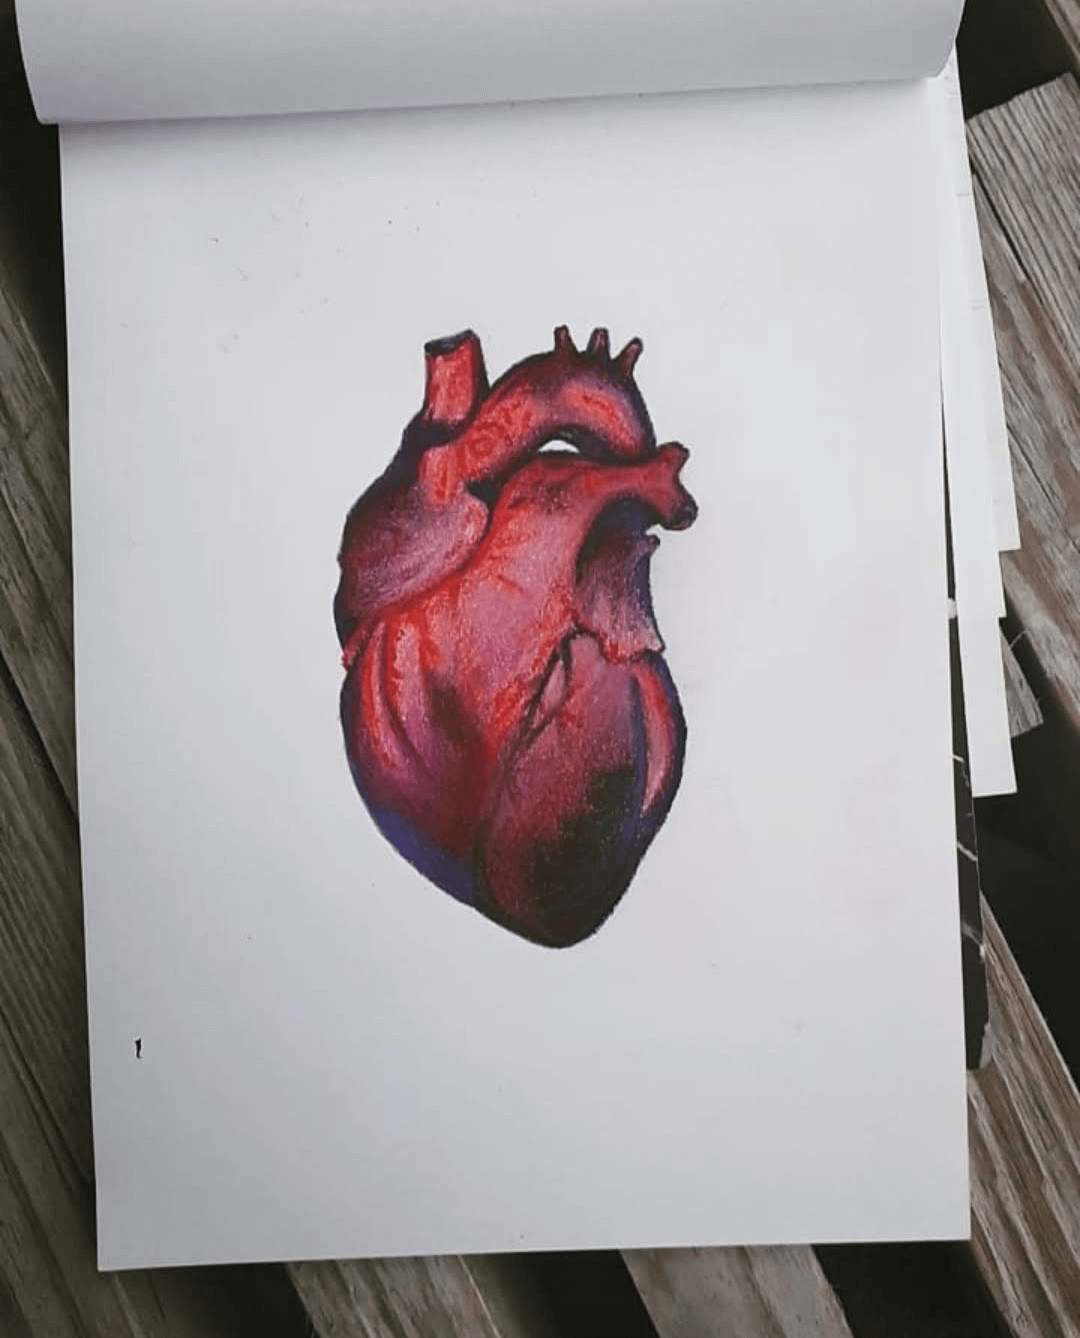 Illustrations: Oh my heart